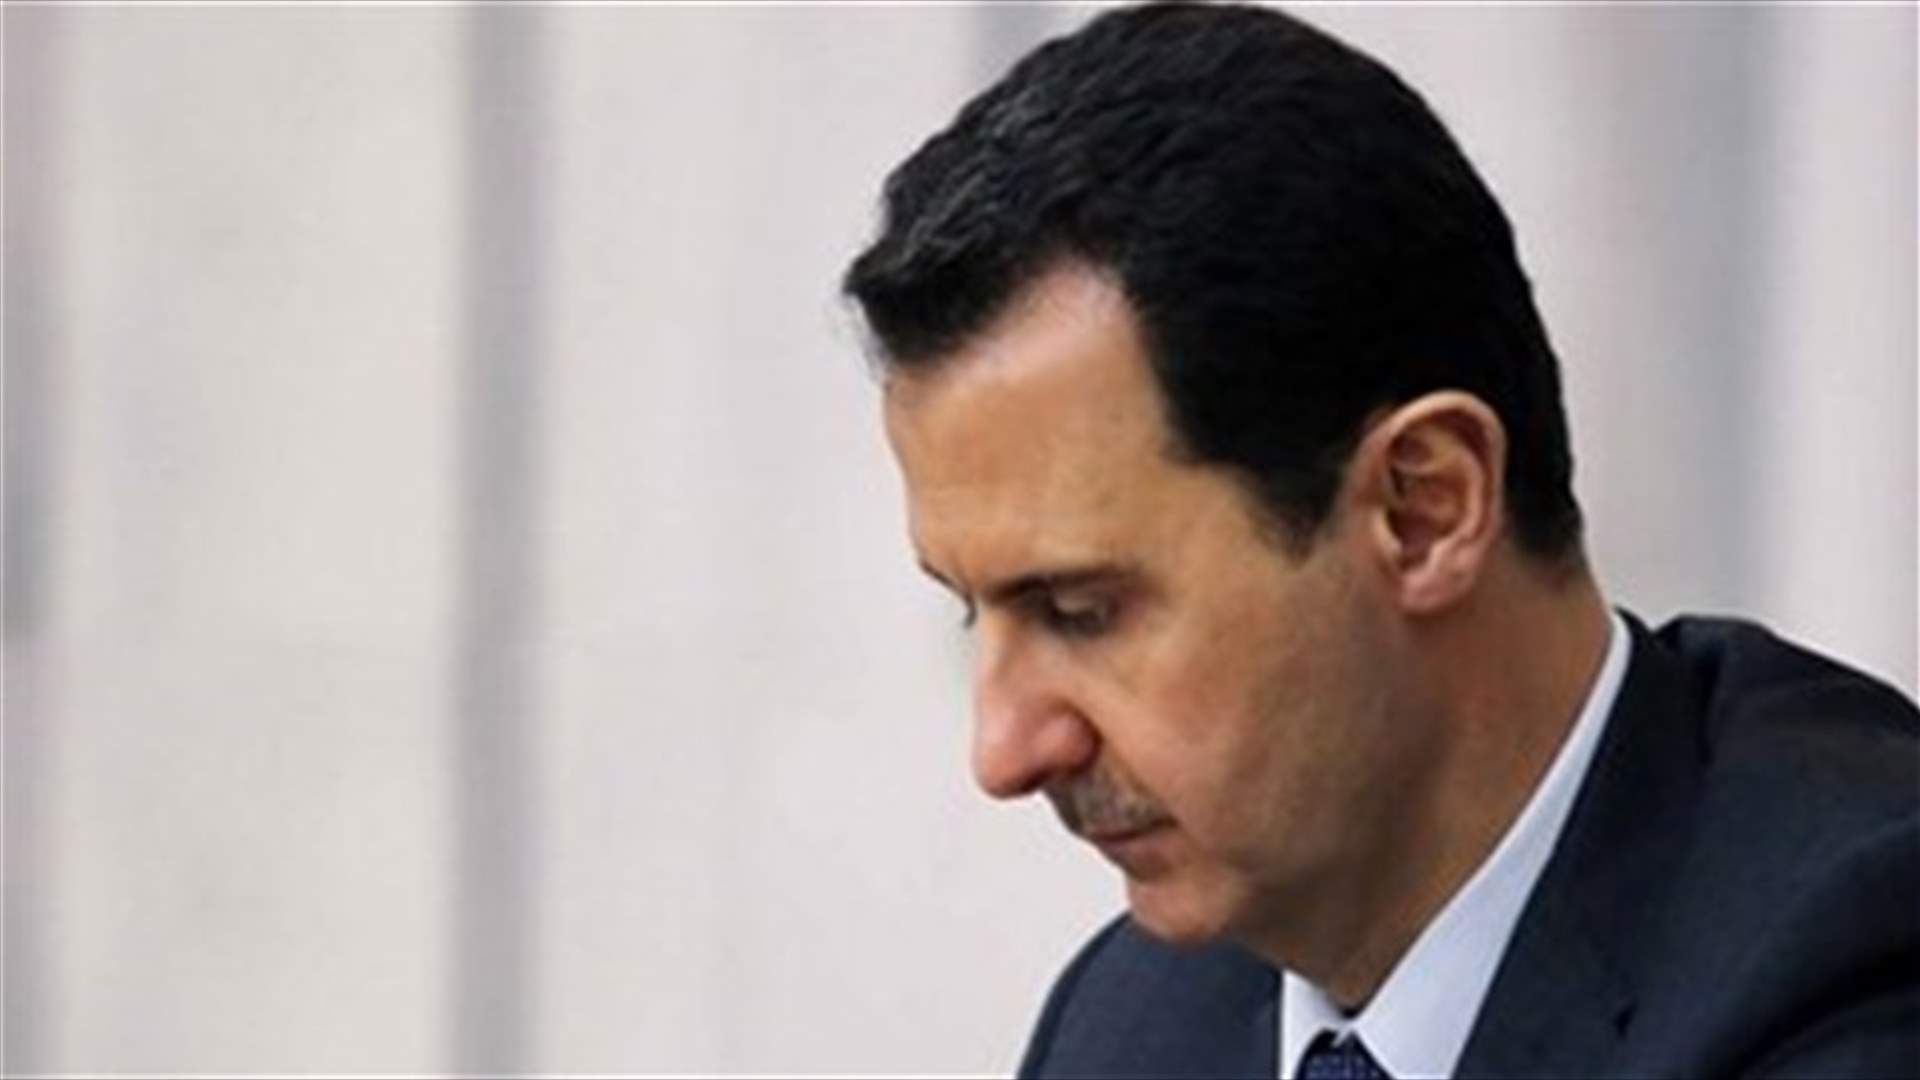 Syrian government denies rumors Assad in poor health